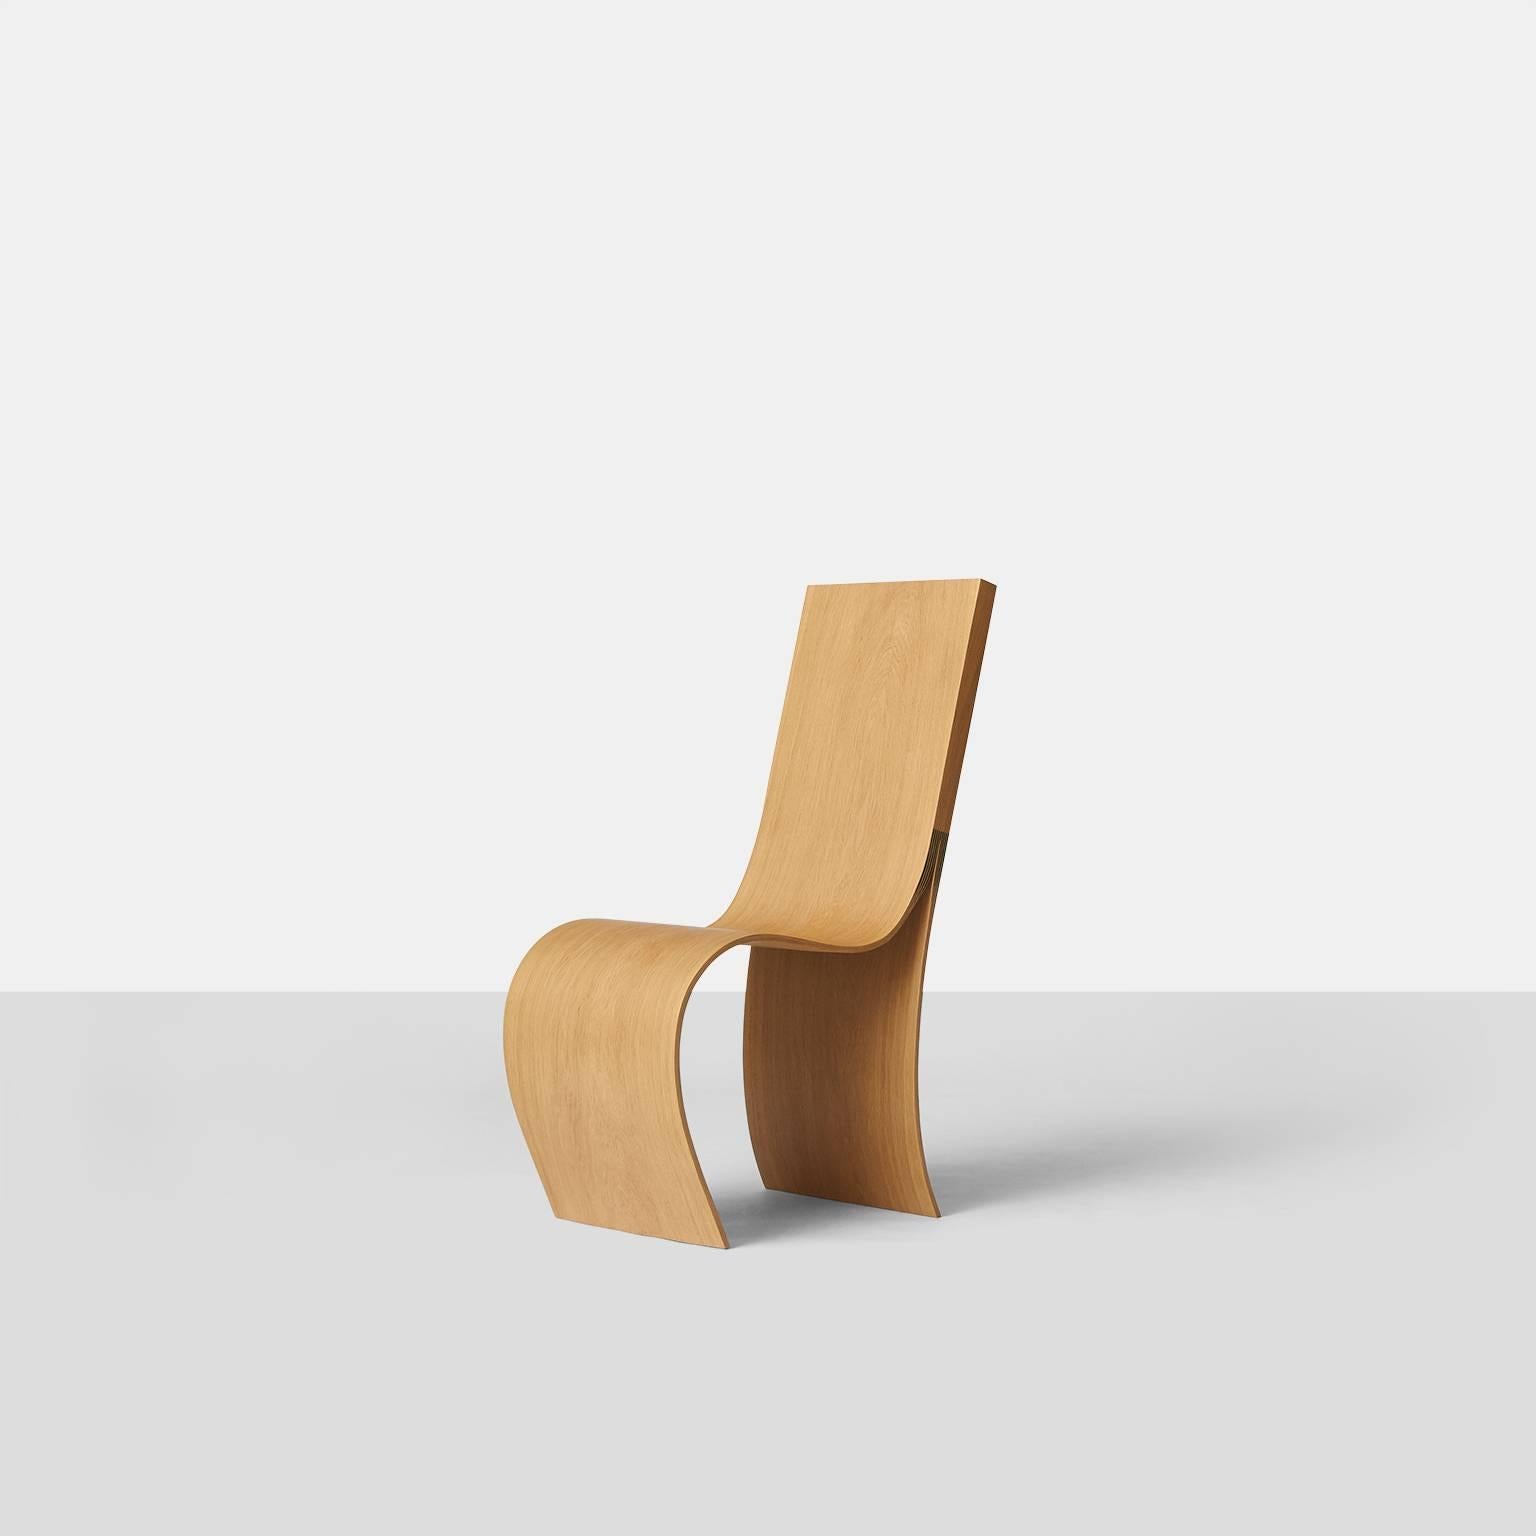 A completely handcrafted chair by Belgian artist Kaspar Hamacher. Made of a solid slab of oak from naturally fallen trees. The slab has been split in multiple layers and then shaped to create the soft curve of the seat. An Almond & Co. U.S.